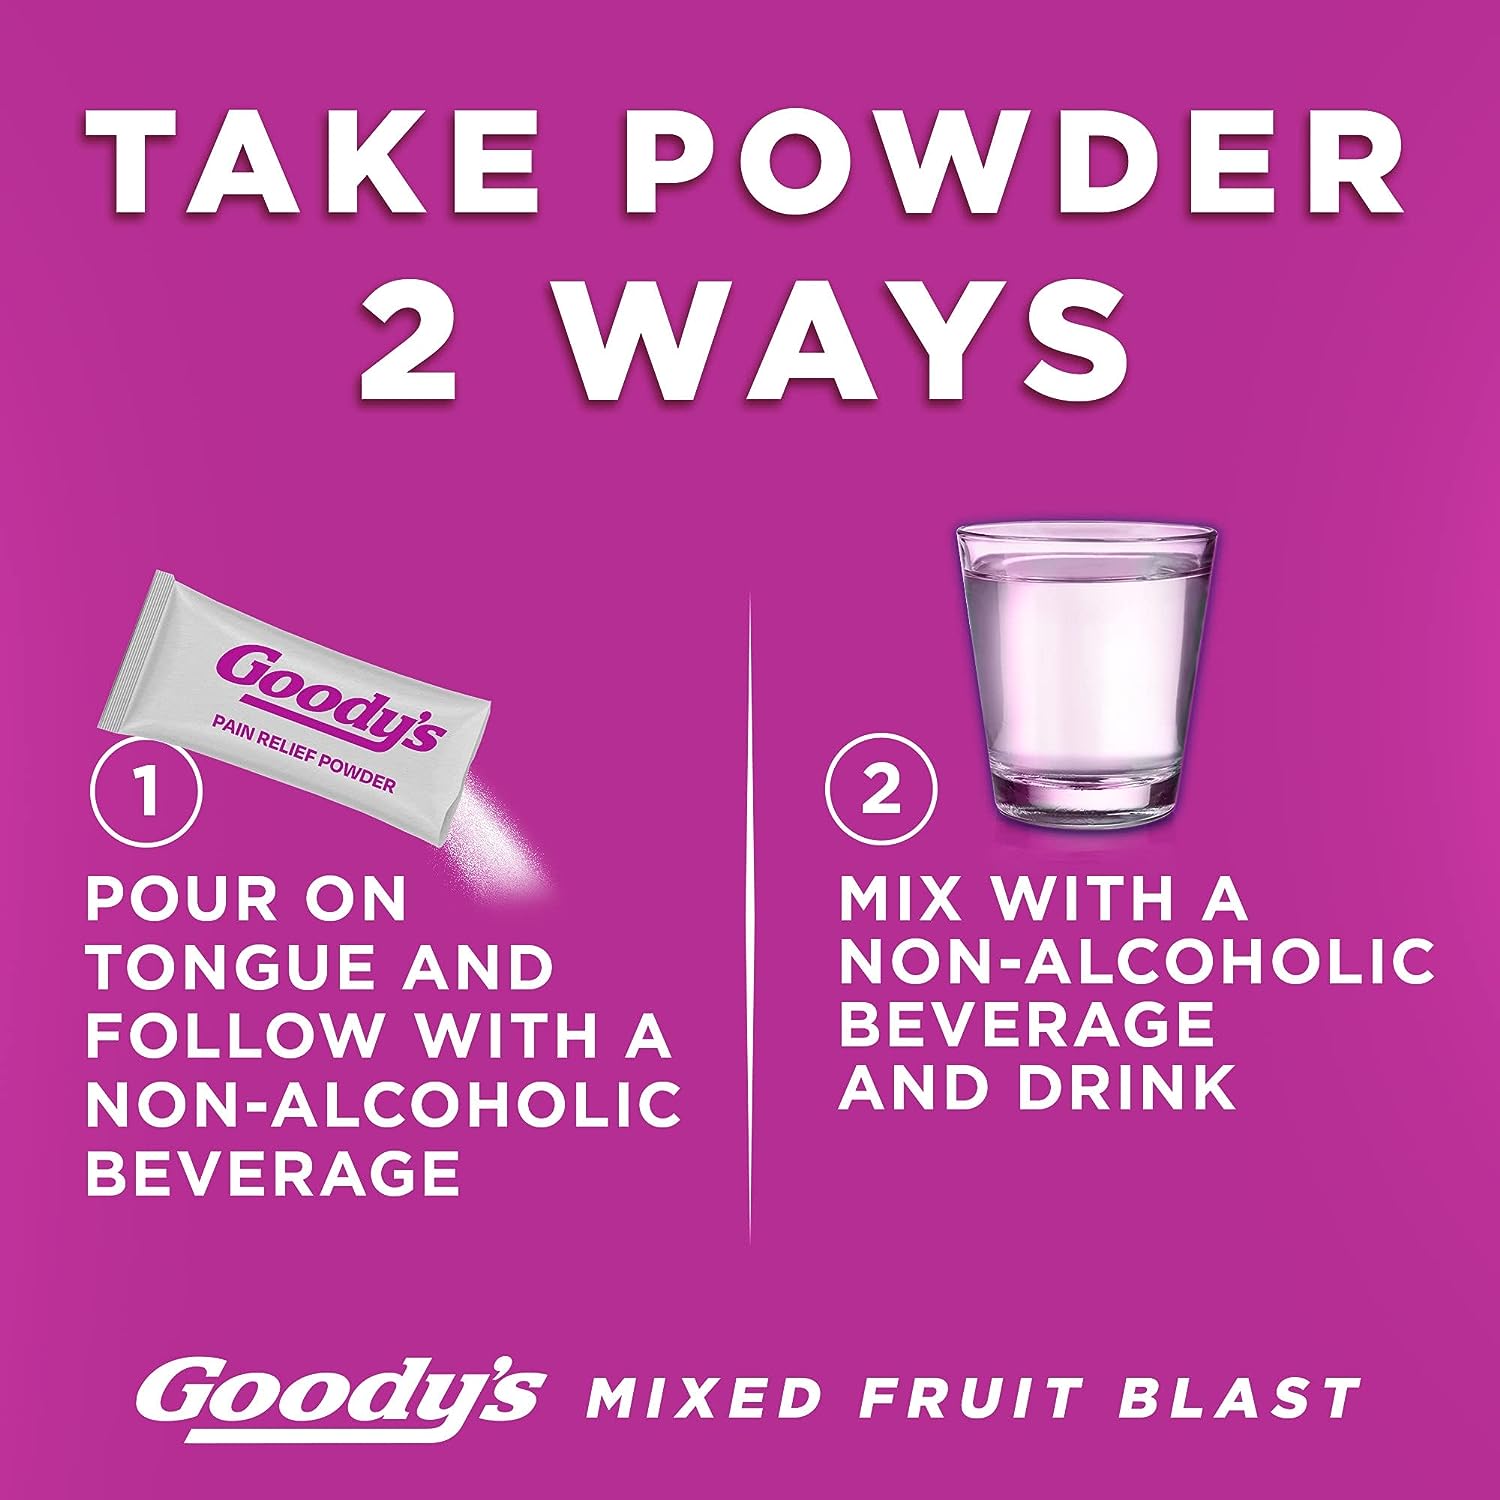 Goody's Pain Relief Powders, Extra Strength Headache Powder Mixed Fruit Blast, 24 ct (Pack of 1) : Health & Household